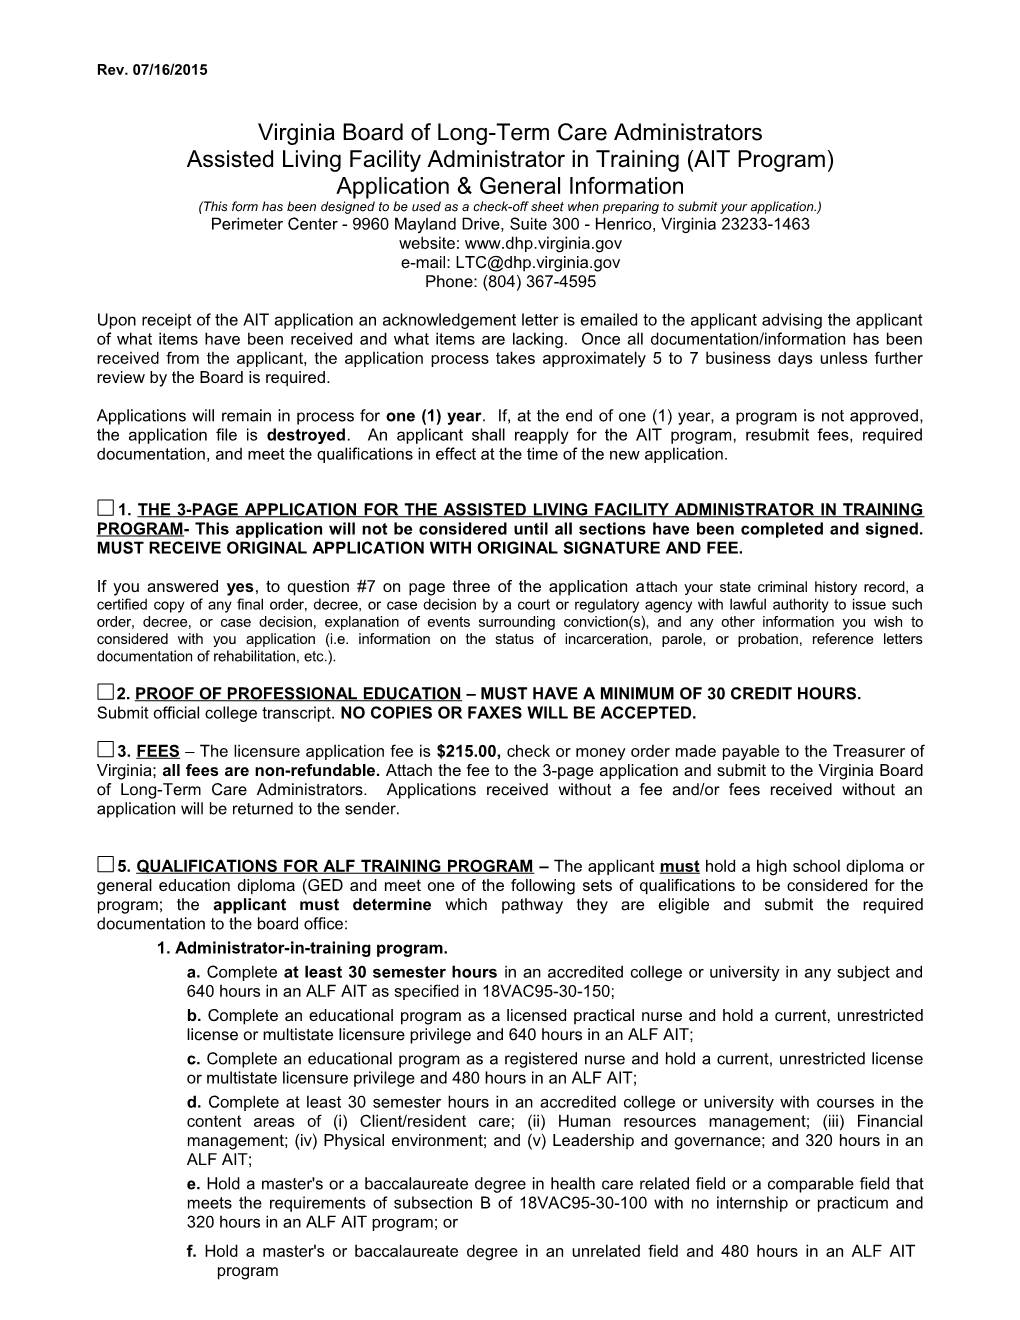 General Information and Instructions Sheet for Application As a Nursing Home Administrator